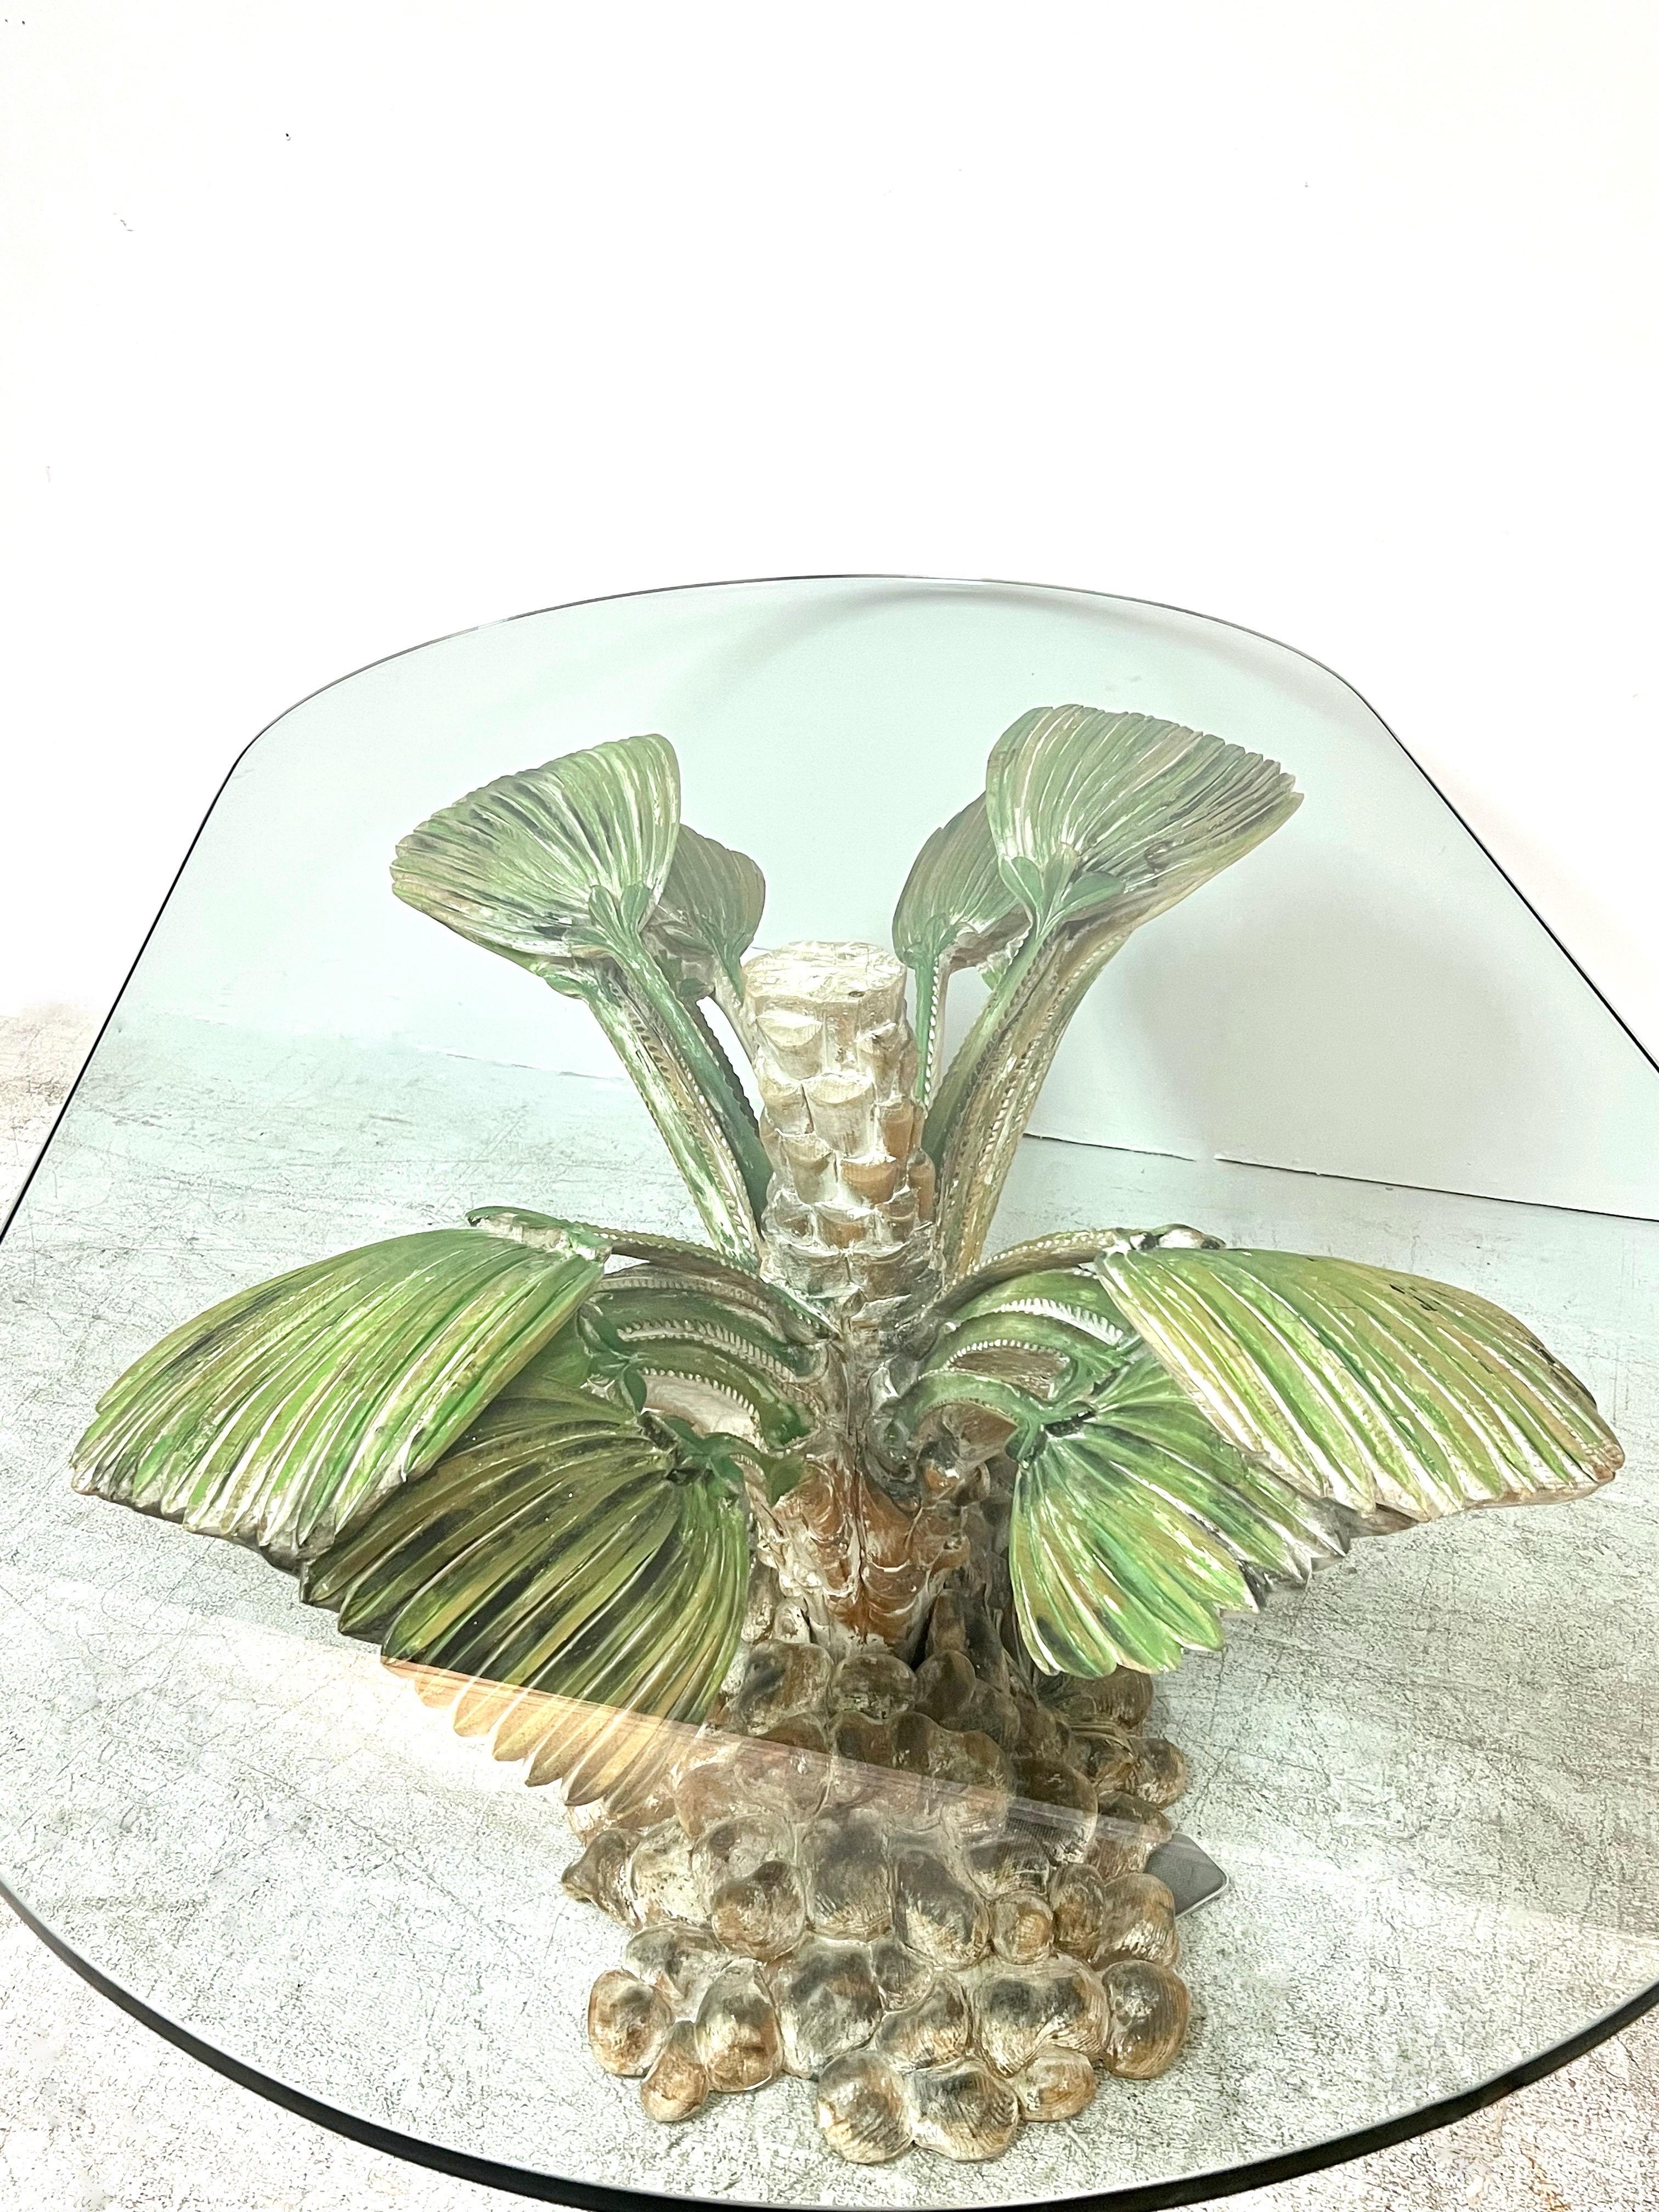 A hand carved sculptural table base in palm tree form. The trunk raises from a bed of rocks and the frond opens to hold the thick glass top. Quite unique.